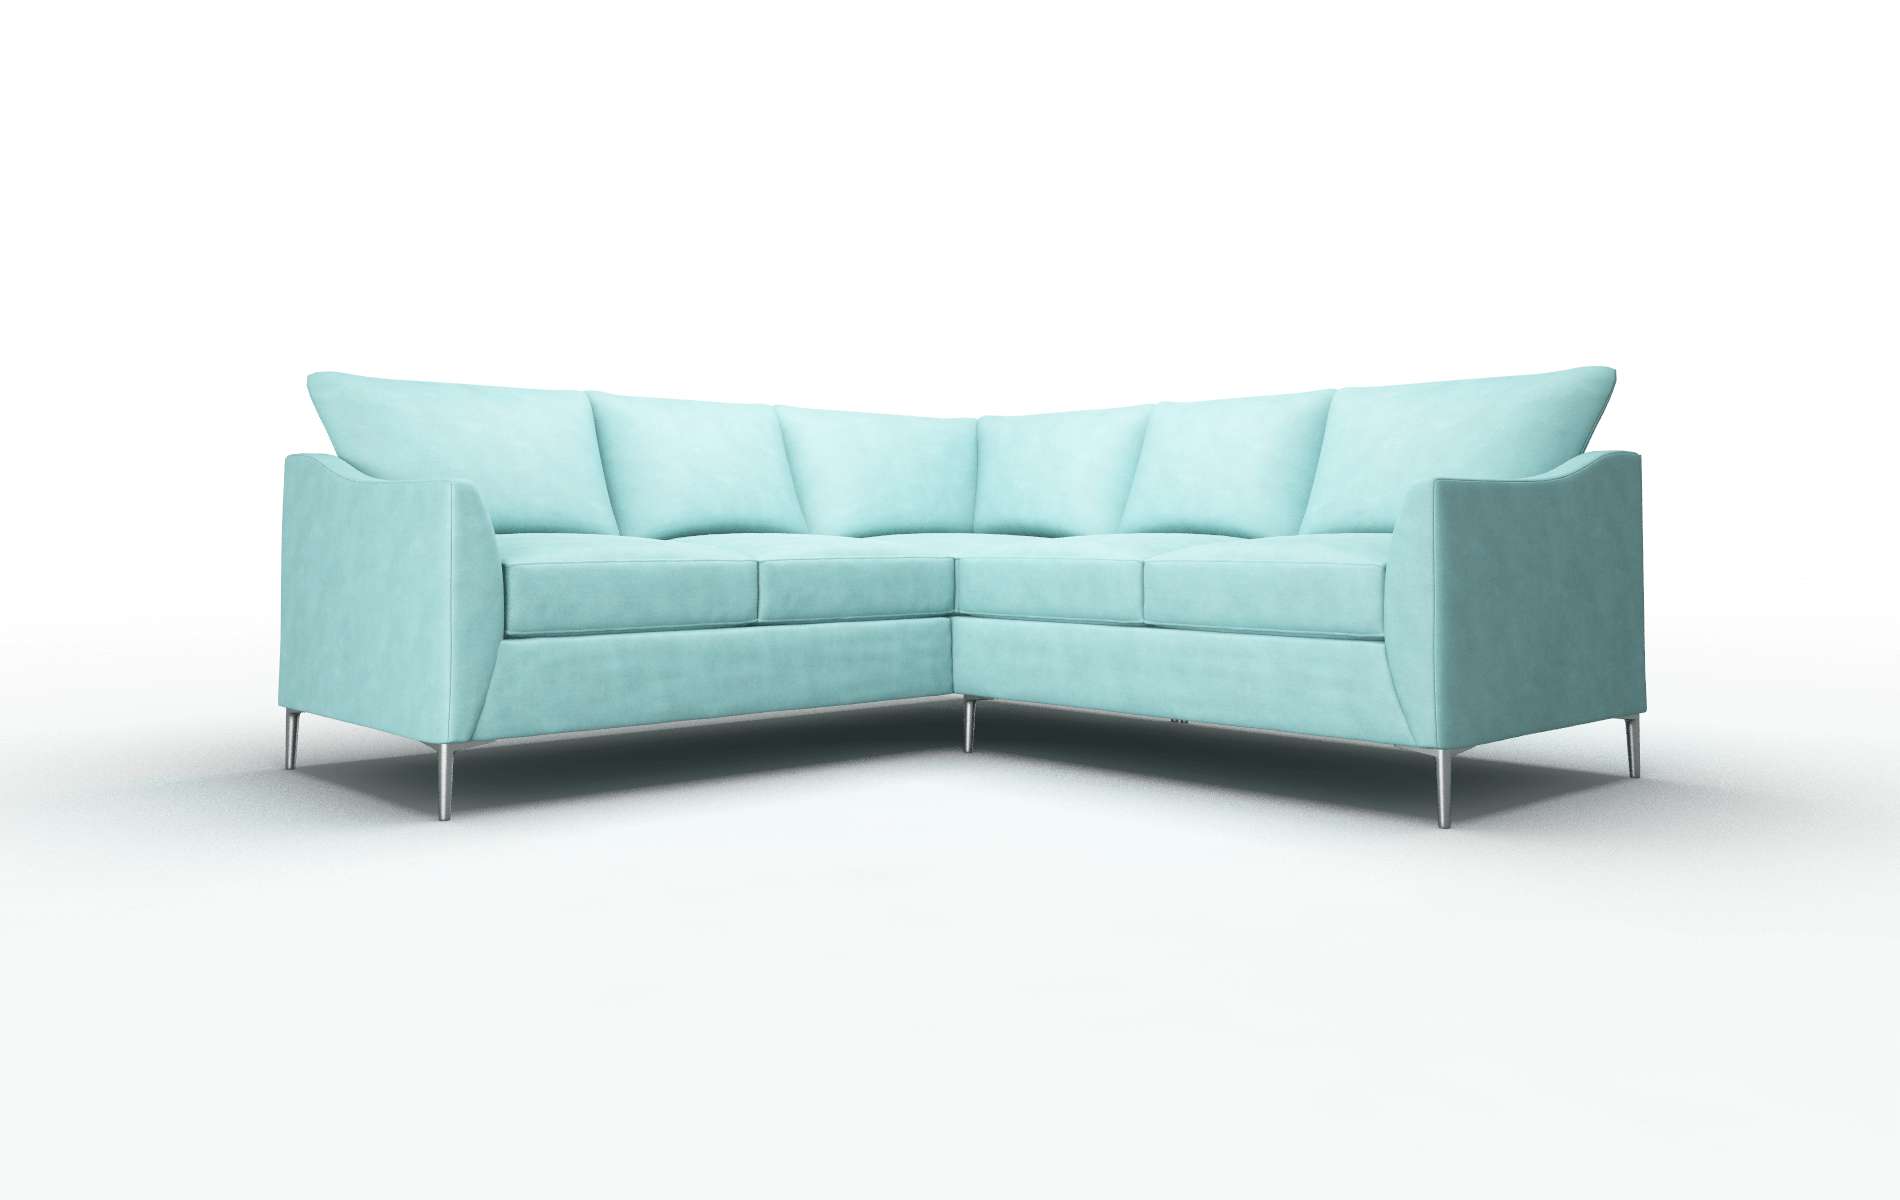 Hamburg Curious Turquoise Sectional metal legs 1